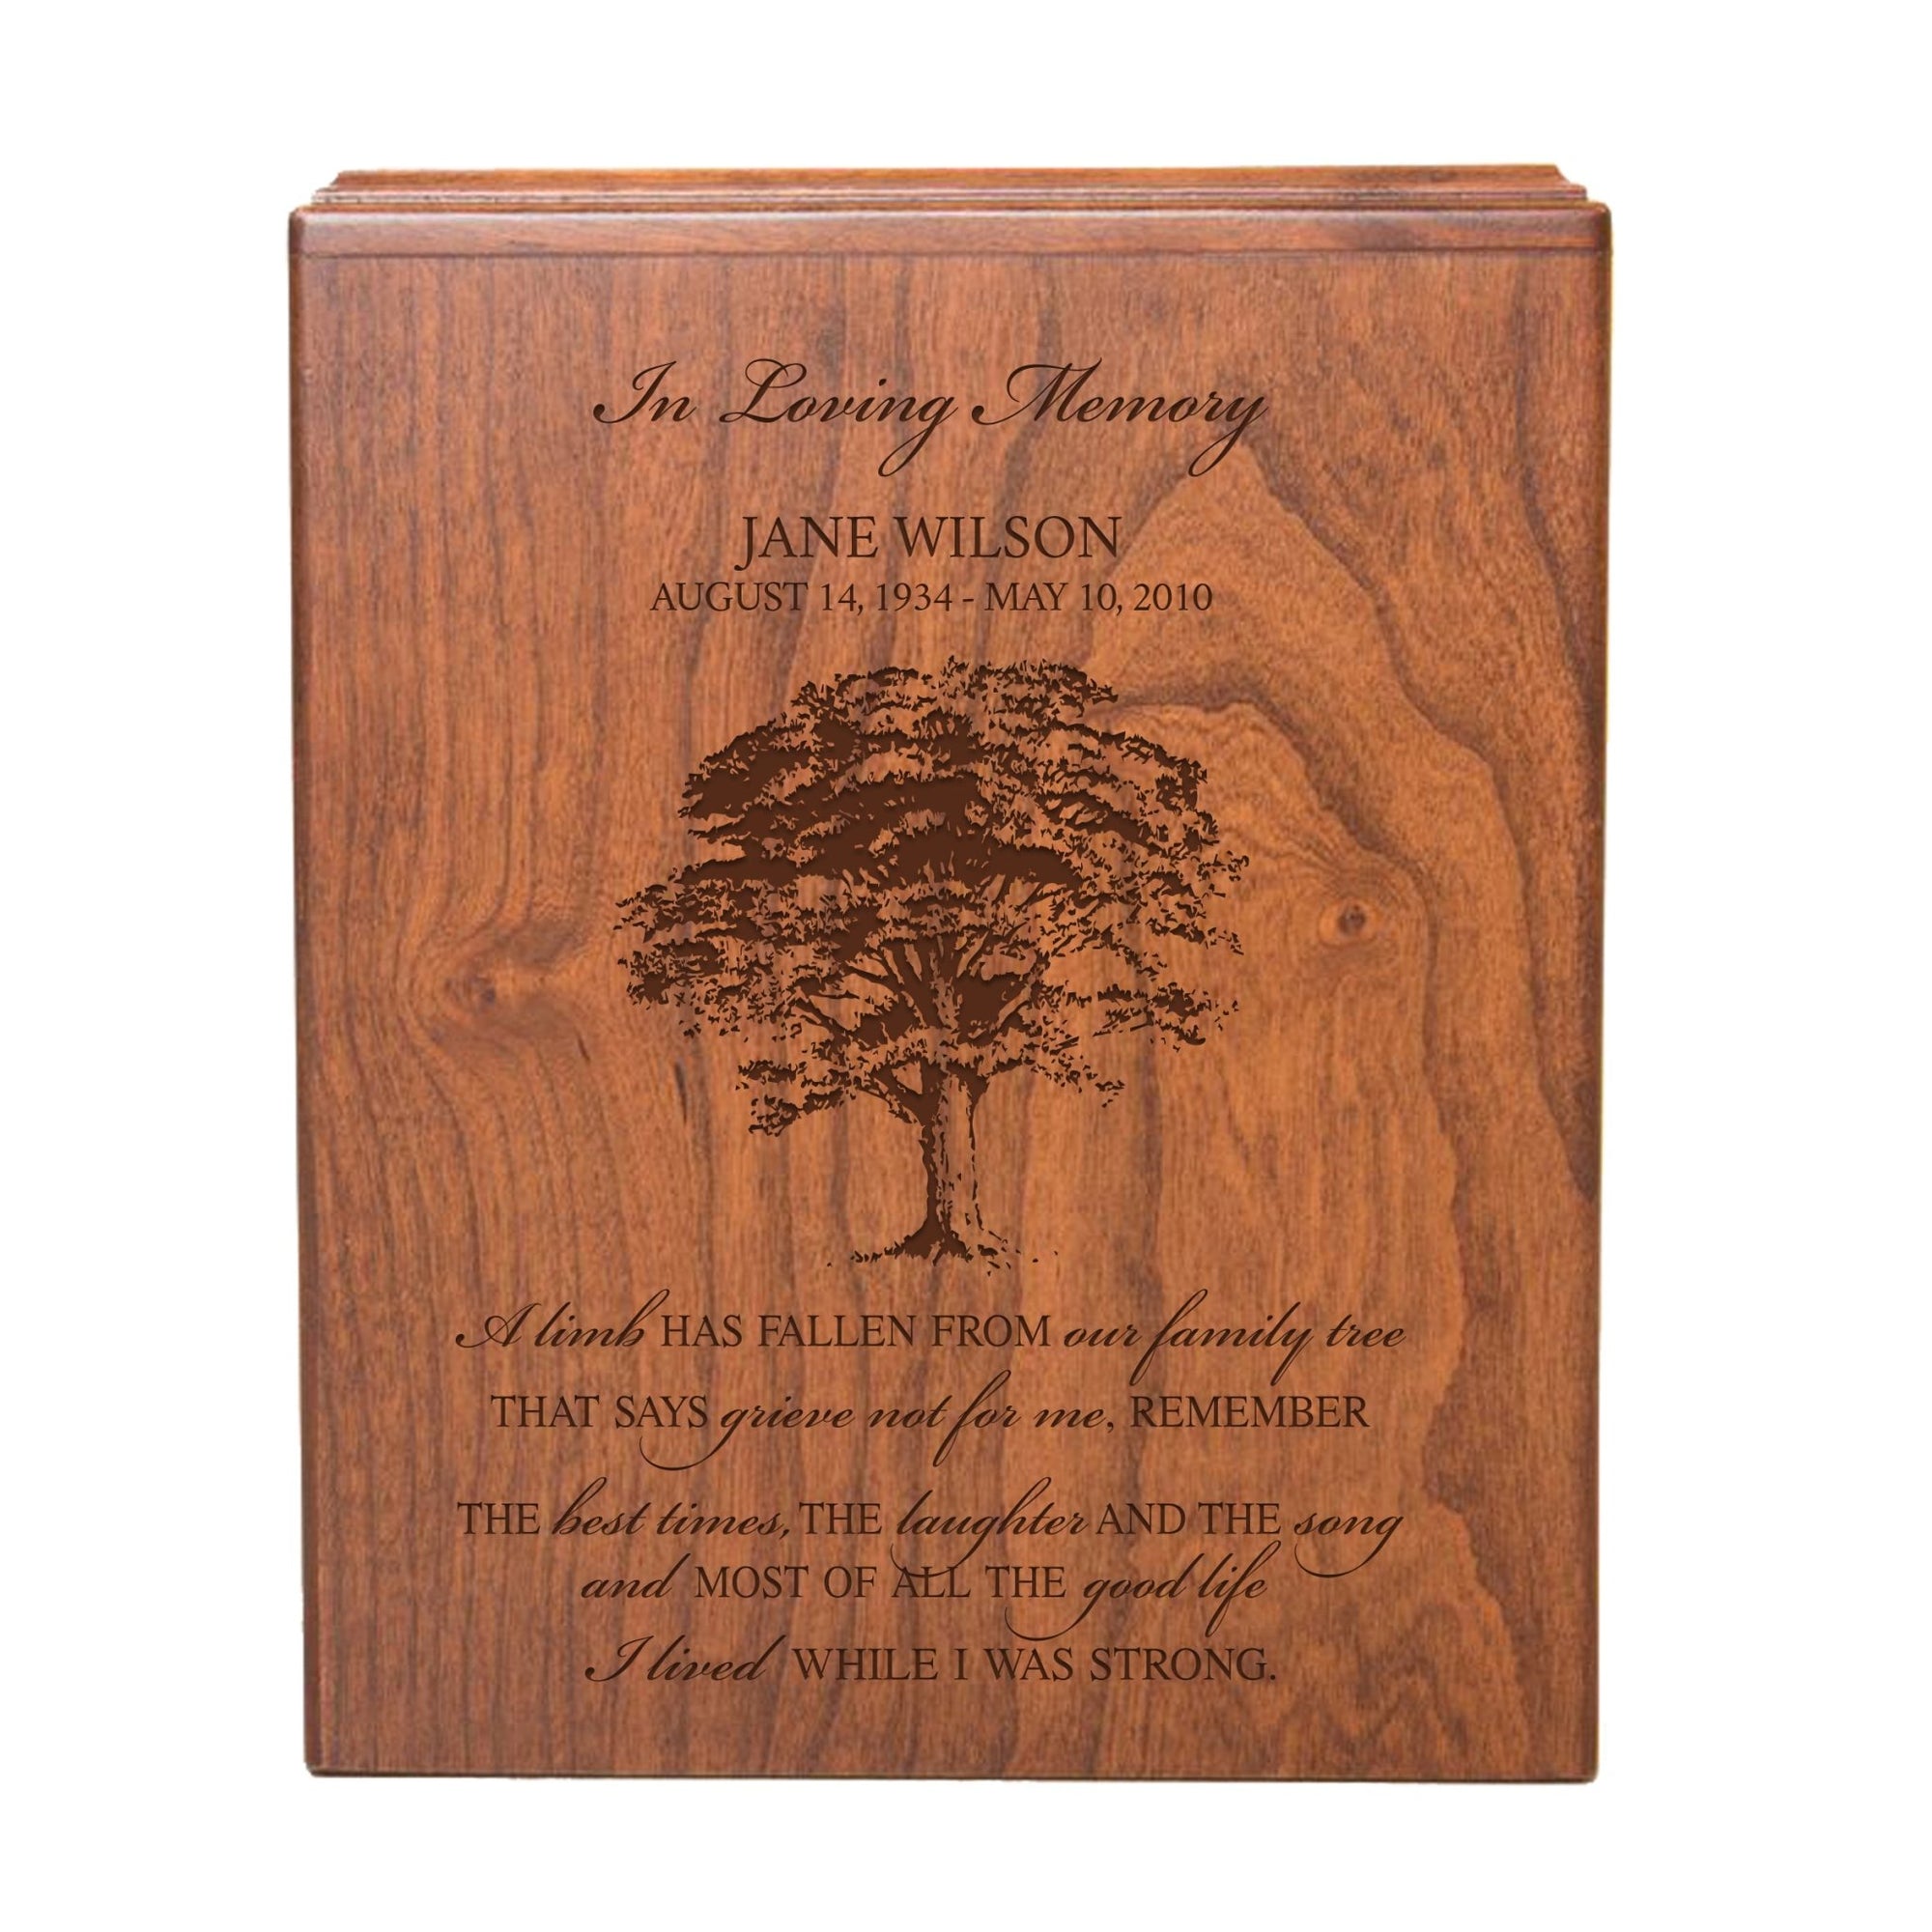 Custom Engraved A Limb Has Fallen Wooden Cremation Urn Box For Ashes Holds 280 Cu Inches - Family Tree Funeral Urn - Human Adult Urn For Male and Female Ashes LifeSong Milestones